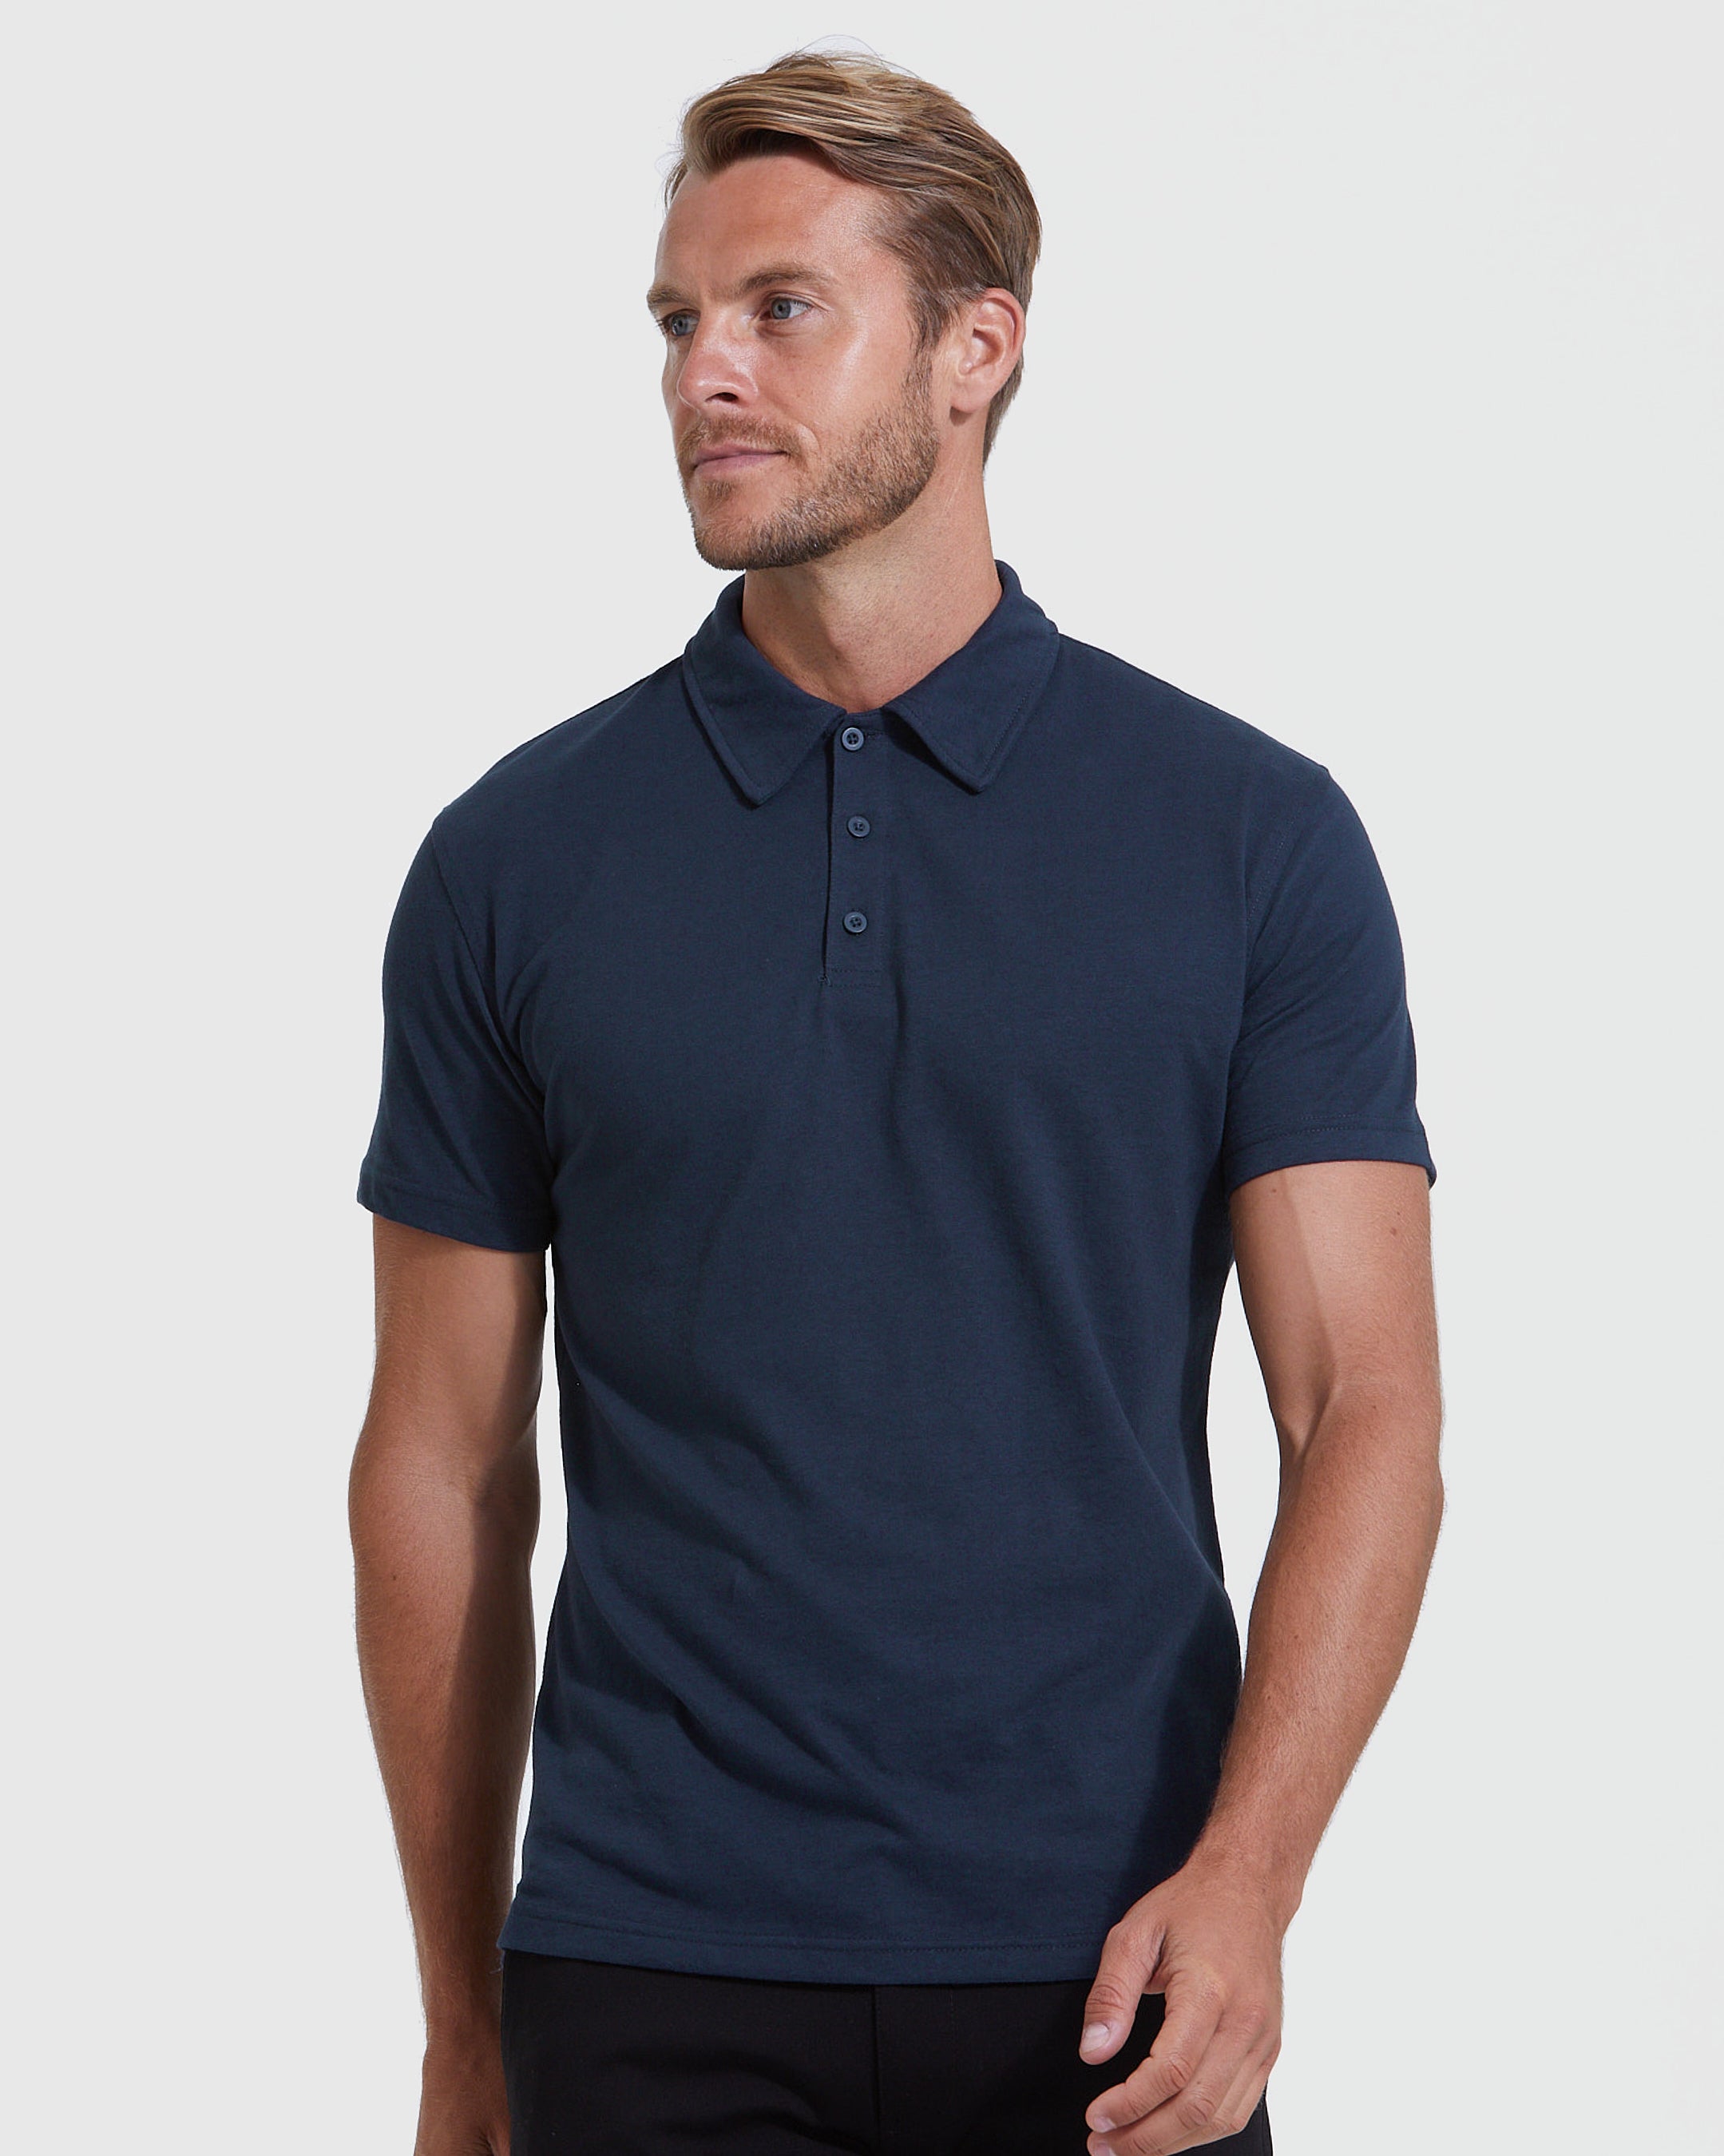 All Navy Polo 6-Pack